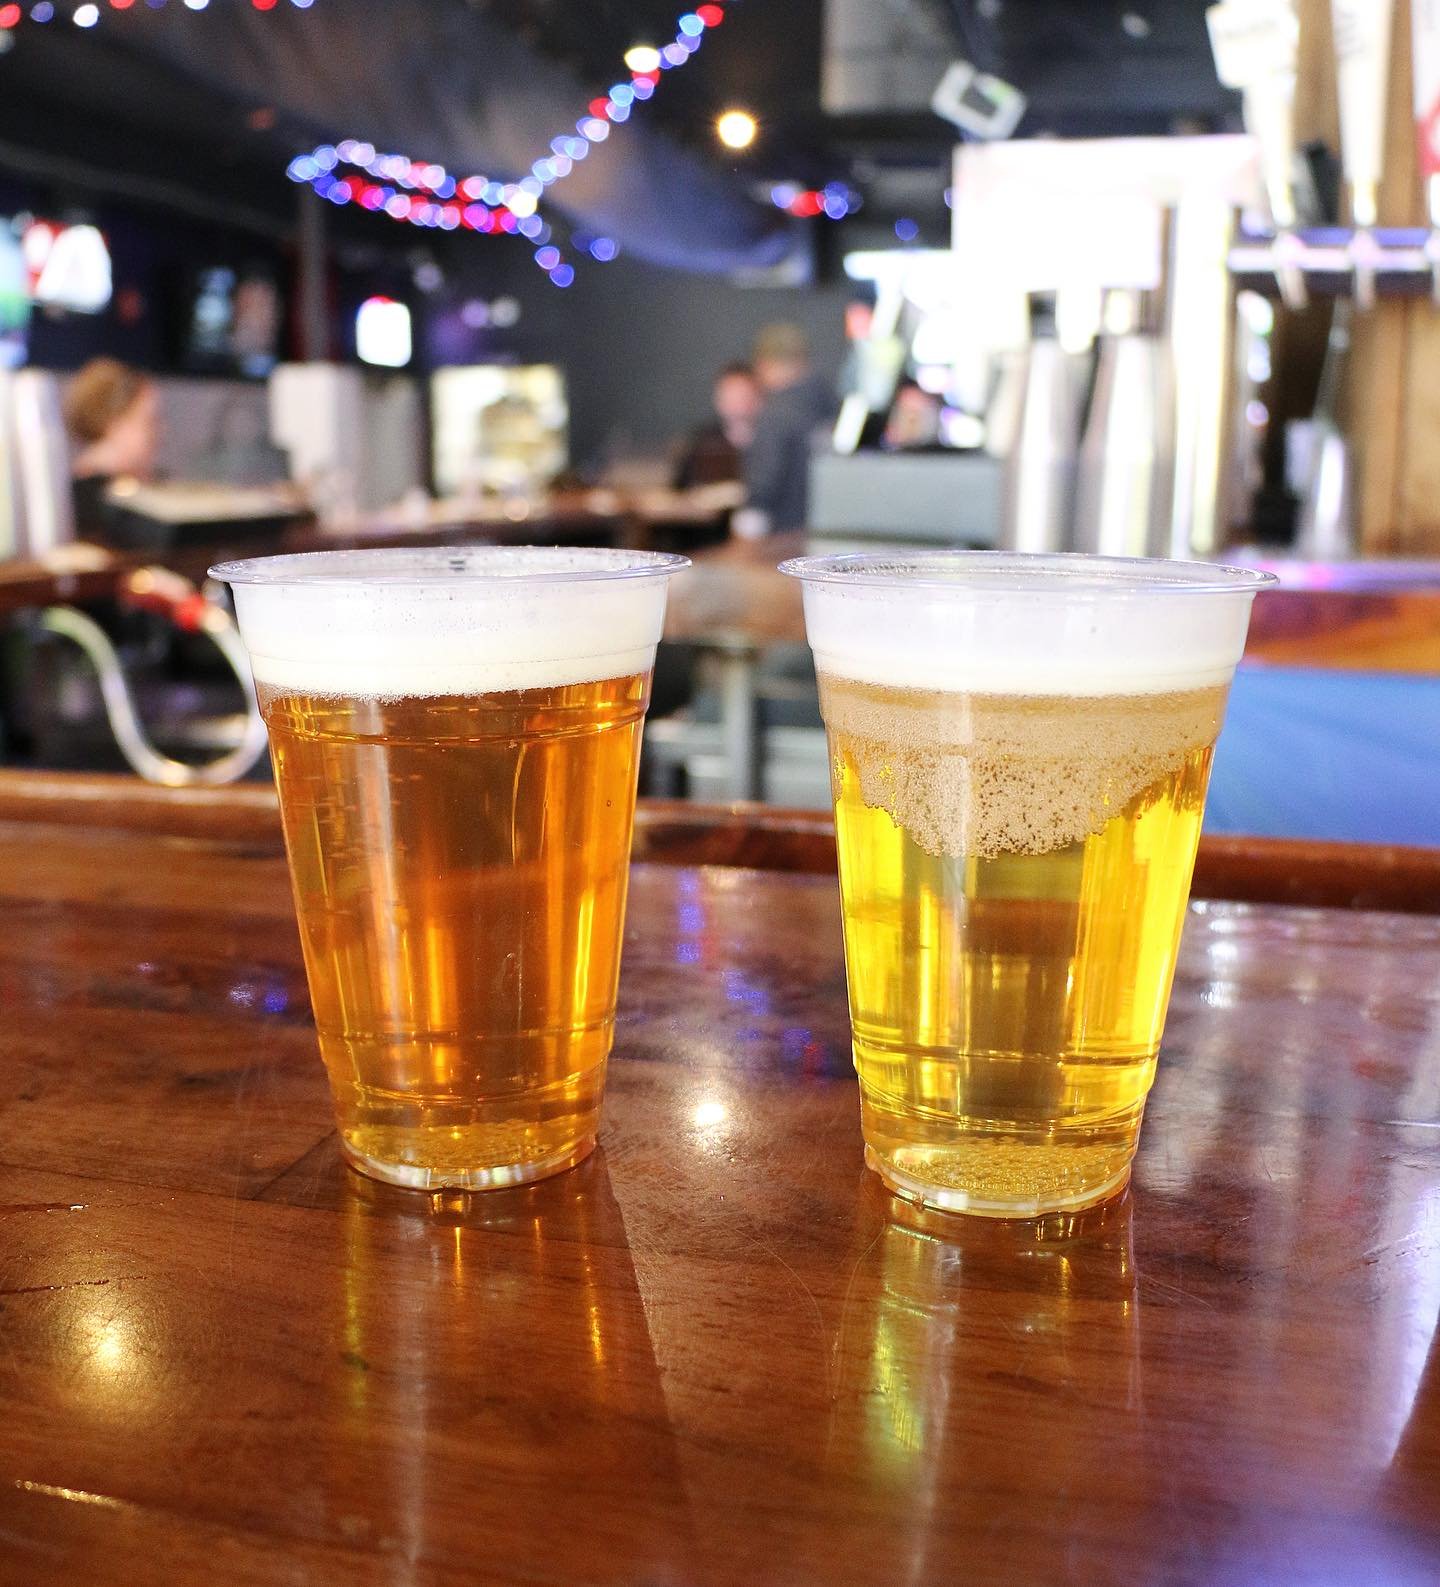 Double the fun, double the drafts! Enjoy BOGO drafts ALL DAY every Thursday! 🍻